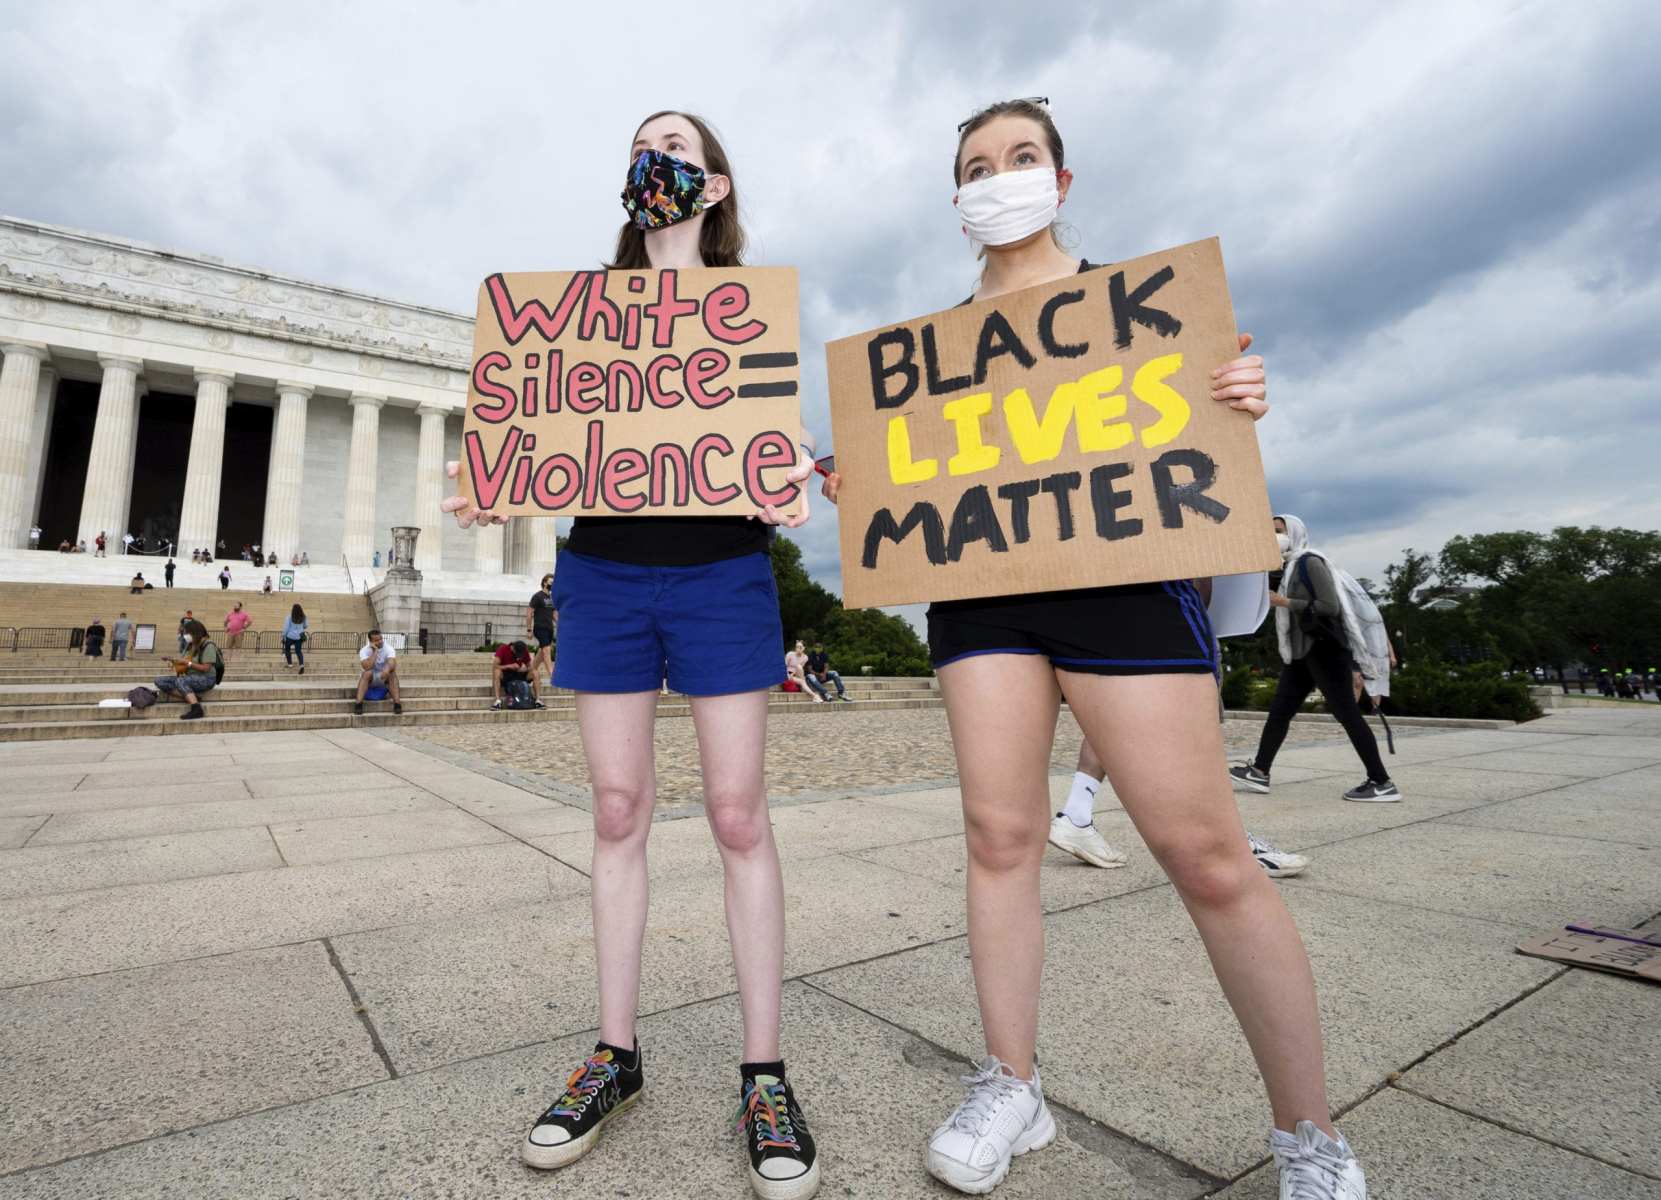 Two women stand with anti-racist signs.